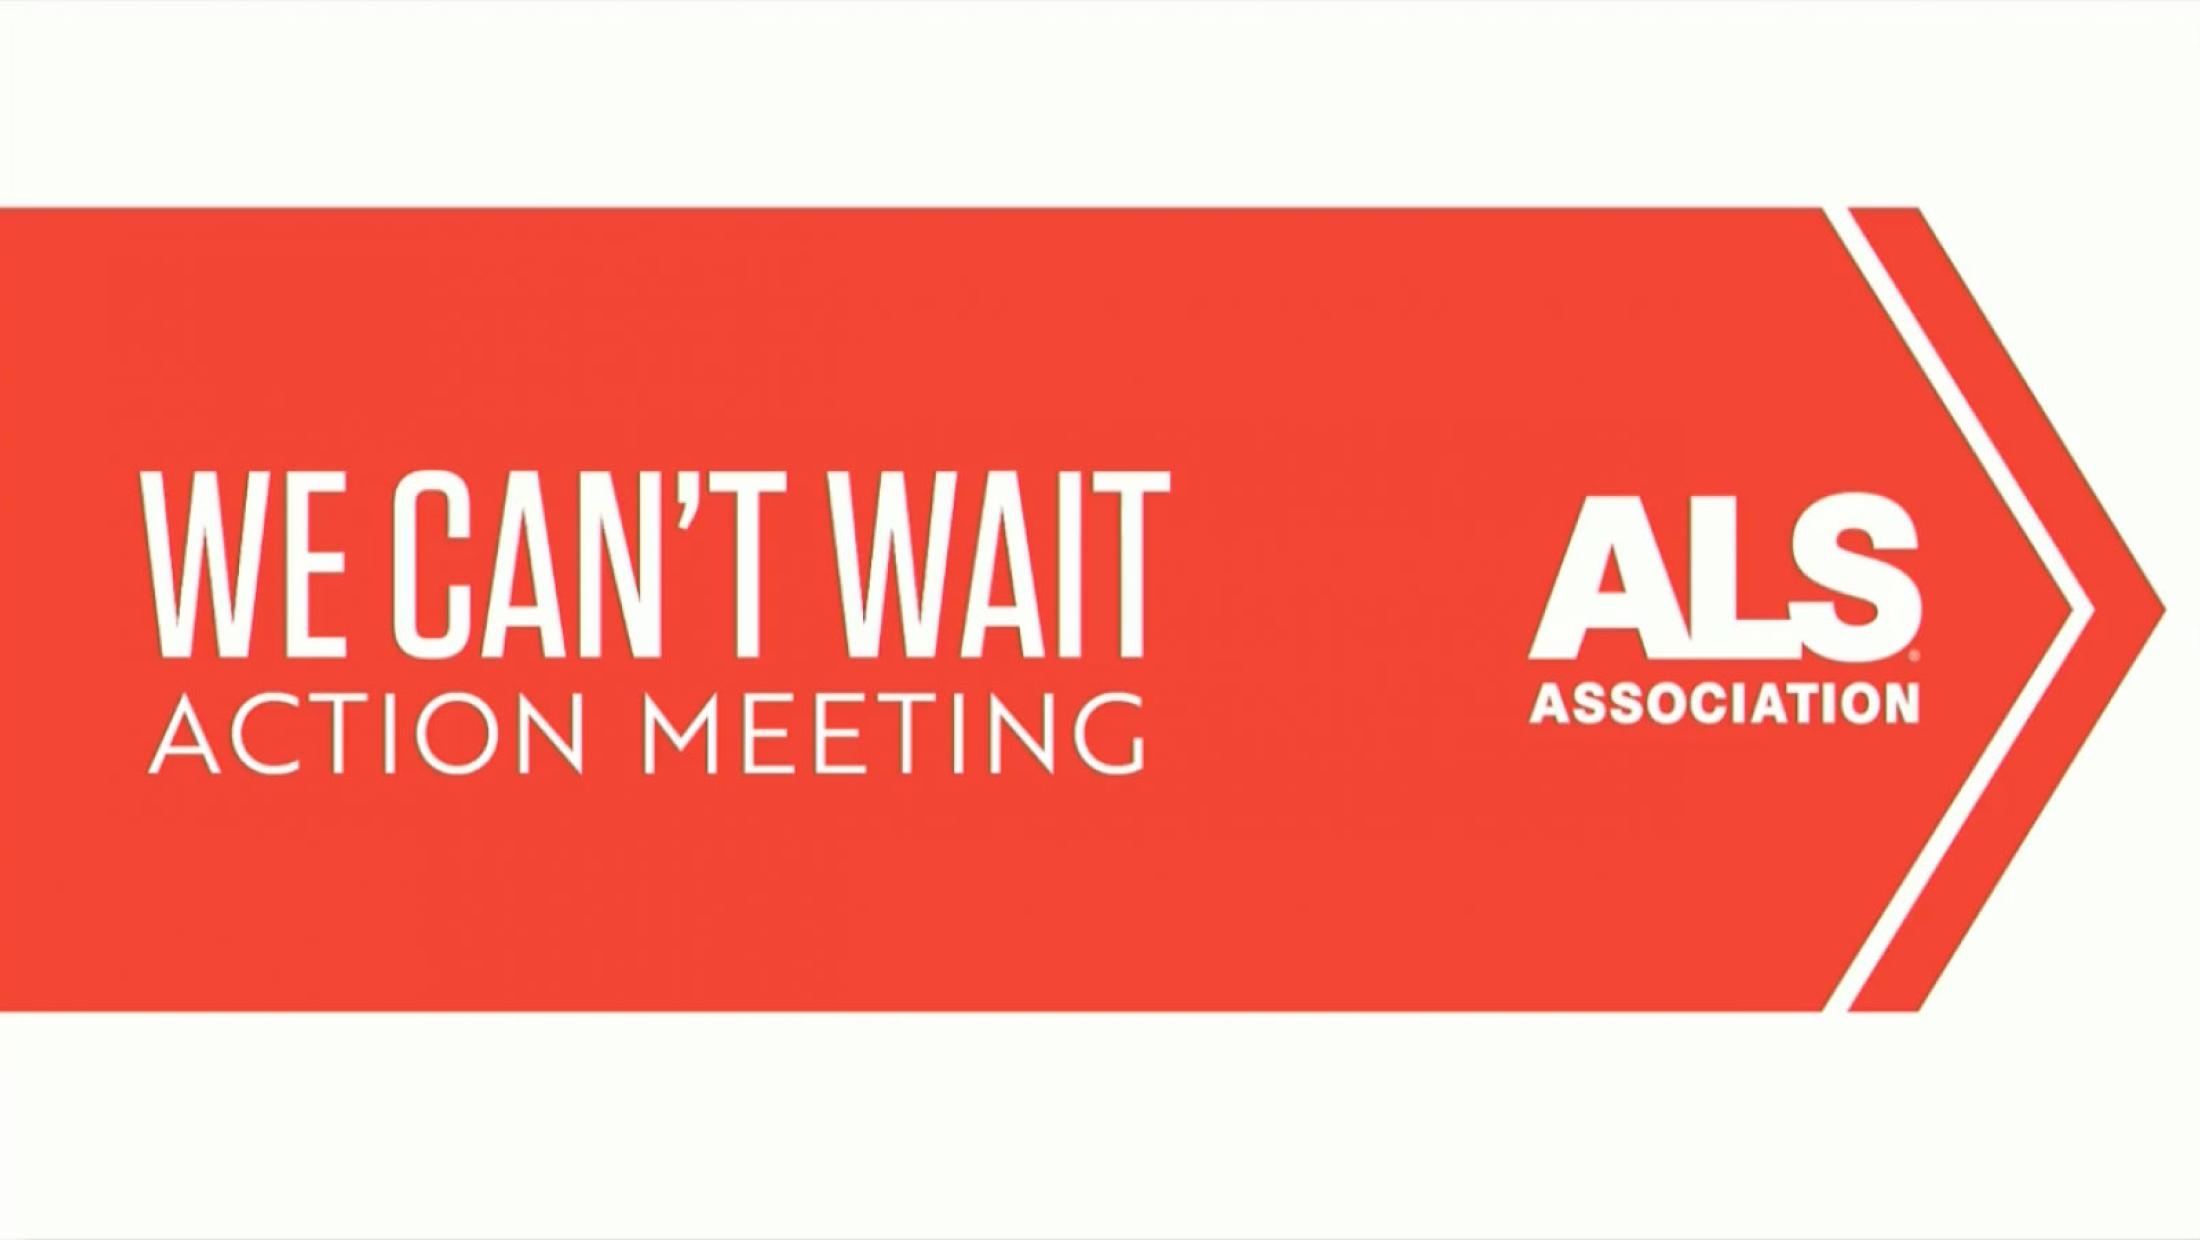 We Can't Wait Action meeting